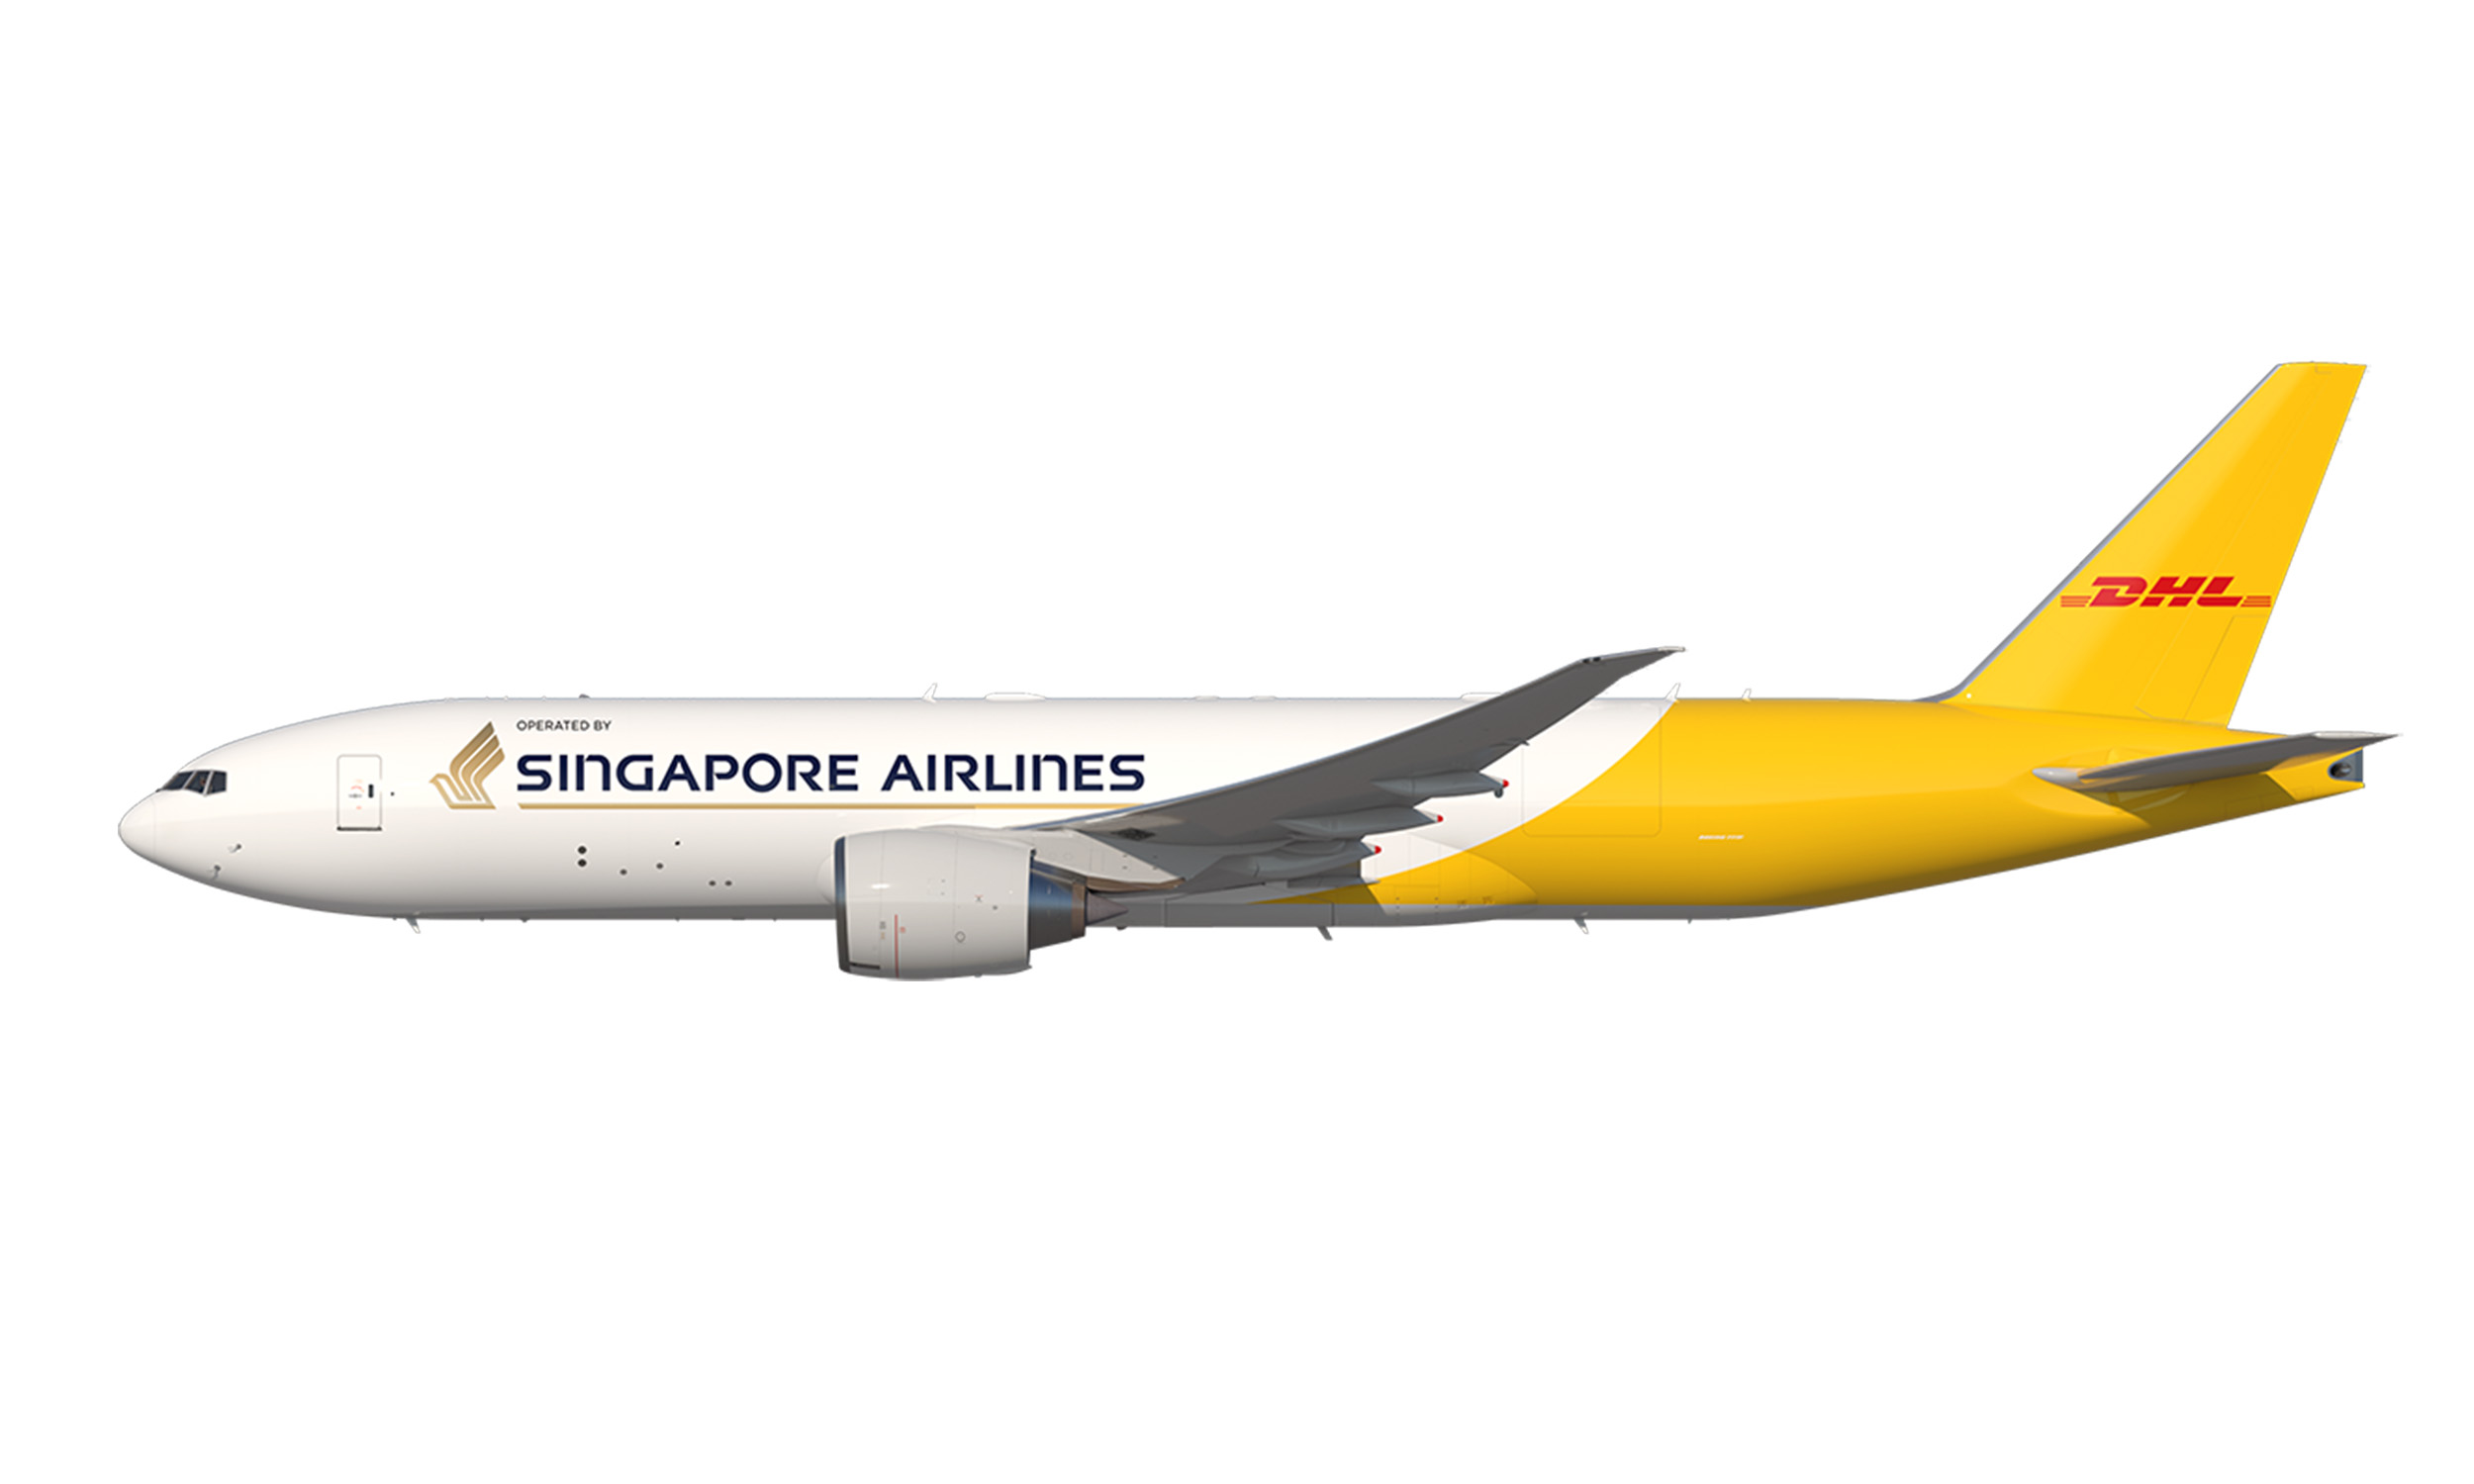 Singapore Airlines to Fly 5 B777 Freighters for DHL Express